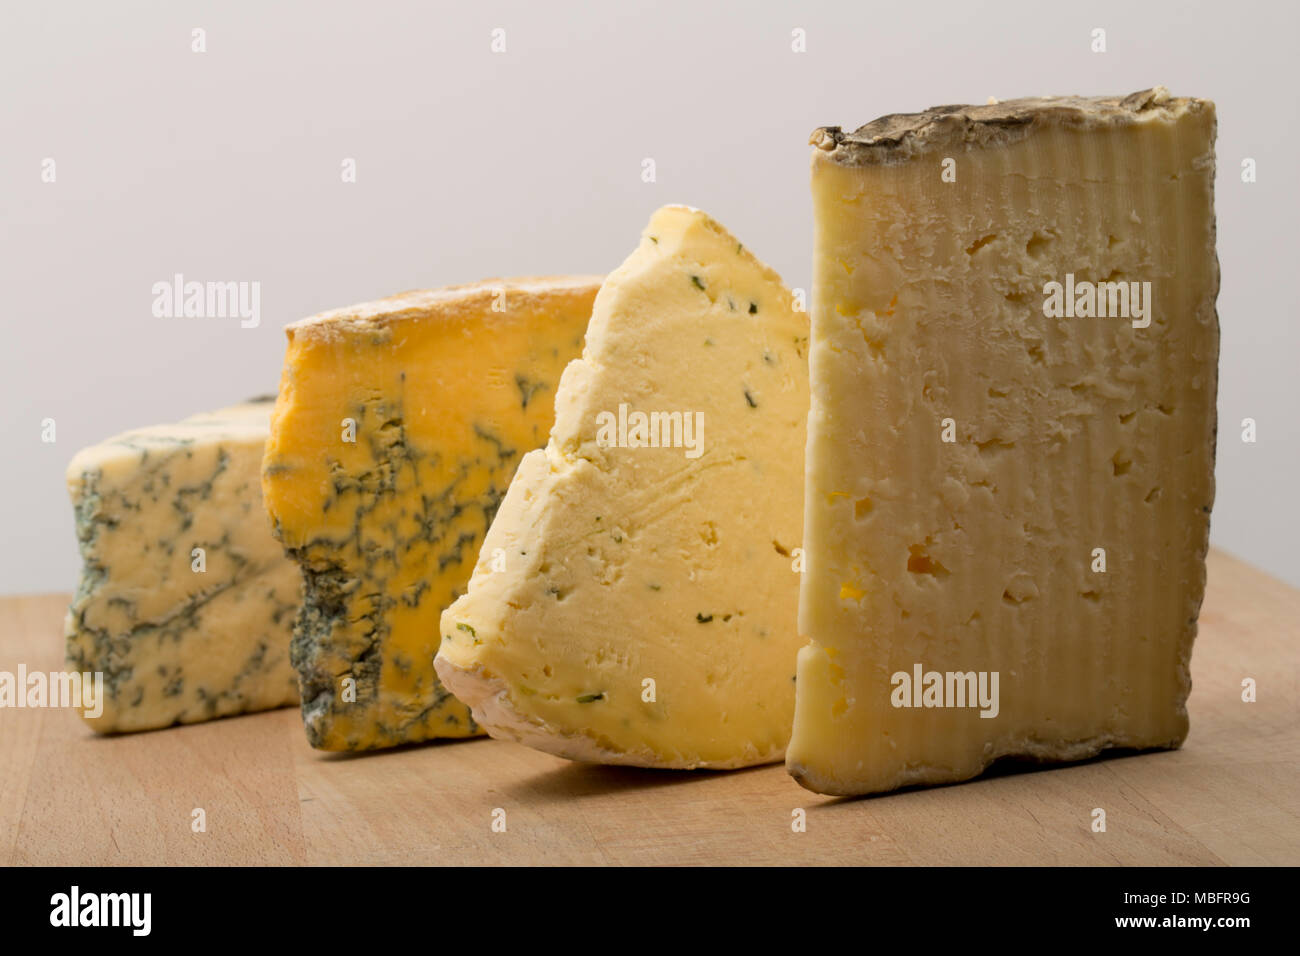 A selction of cheeses bought from a supermarket in the UK. Left-to-right: Dorset Blue Vinney, CropwellBishop Nottinghamshire Blue, Sharpham Rustic chi Stock Photo